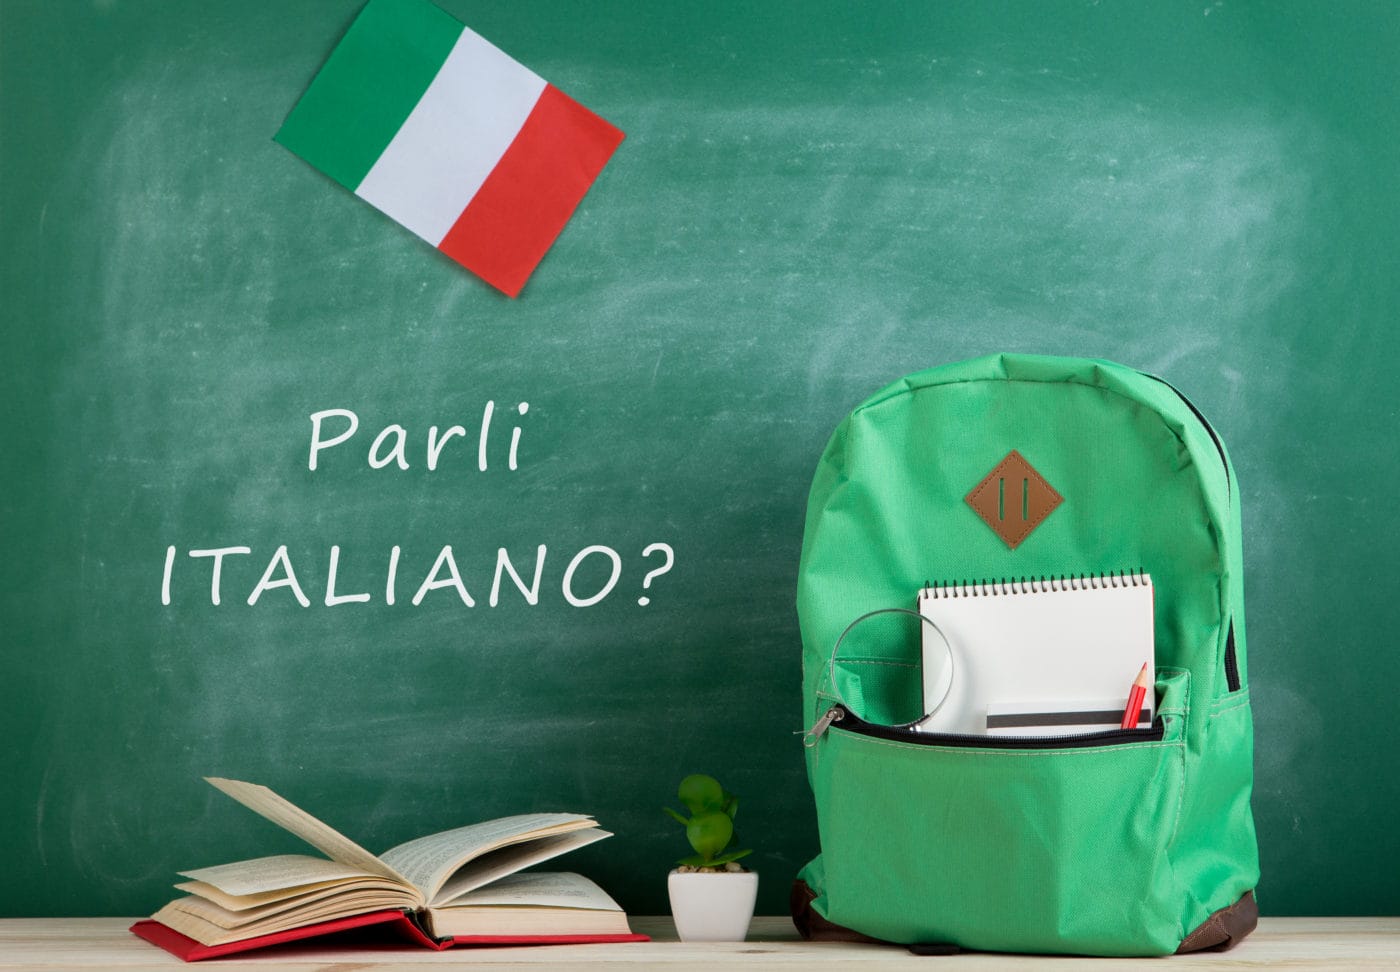 green backpack, blackboard with text "Parli italiano?", flag of Italy, books and notebooks